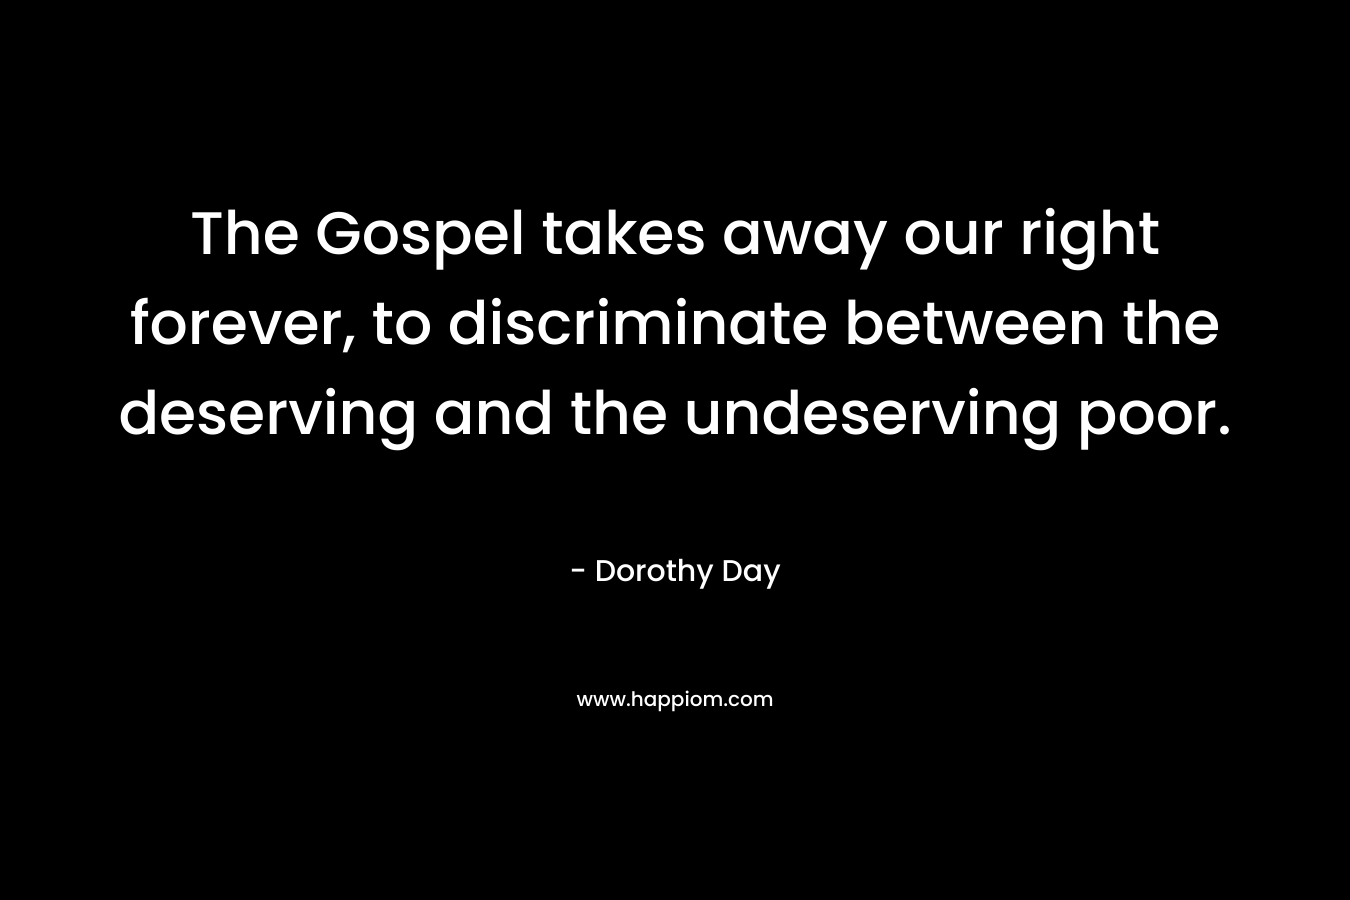 The Gospel takes away our right forever, to discriminate between the deserving and the undeserving poor. – Dorothy Day